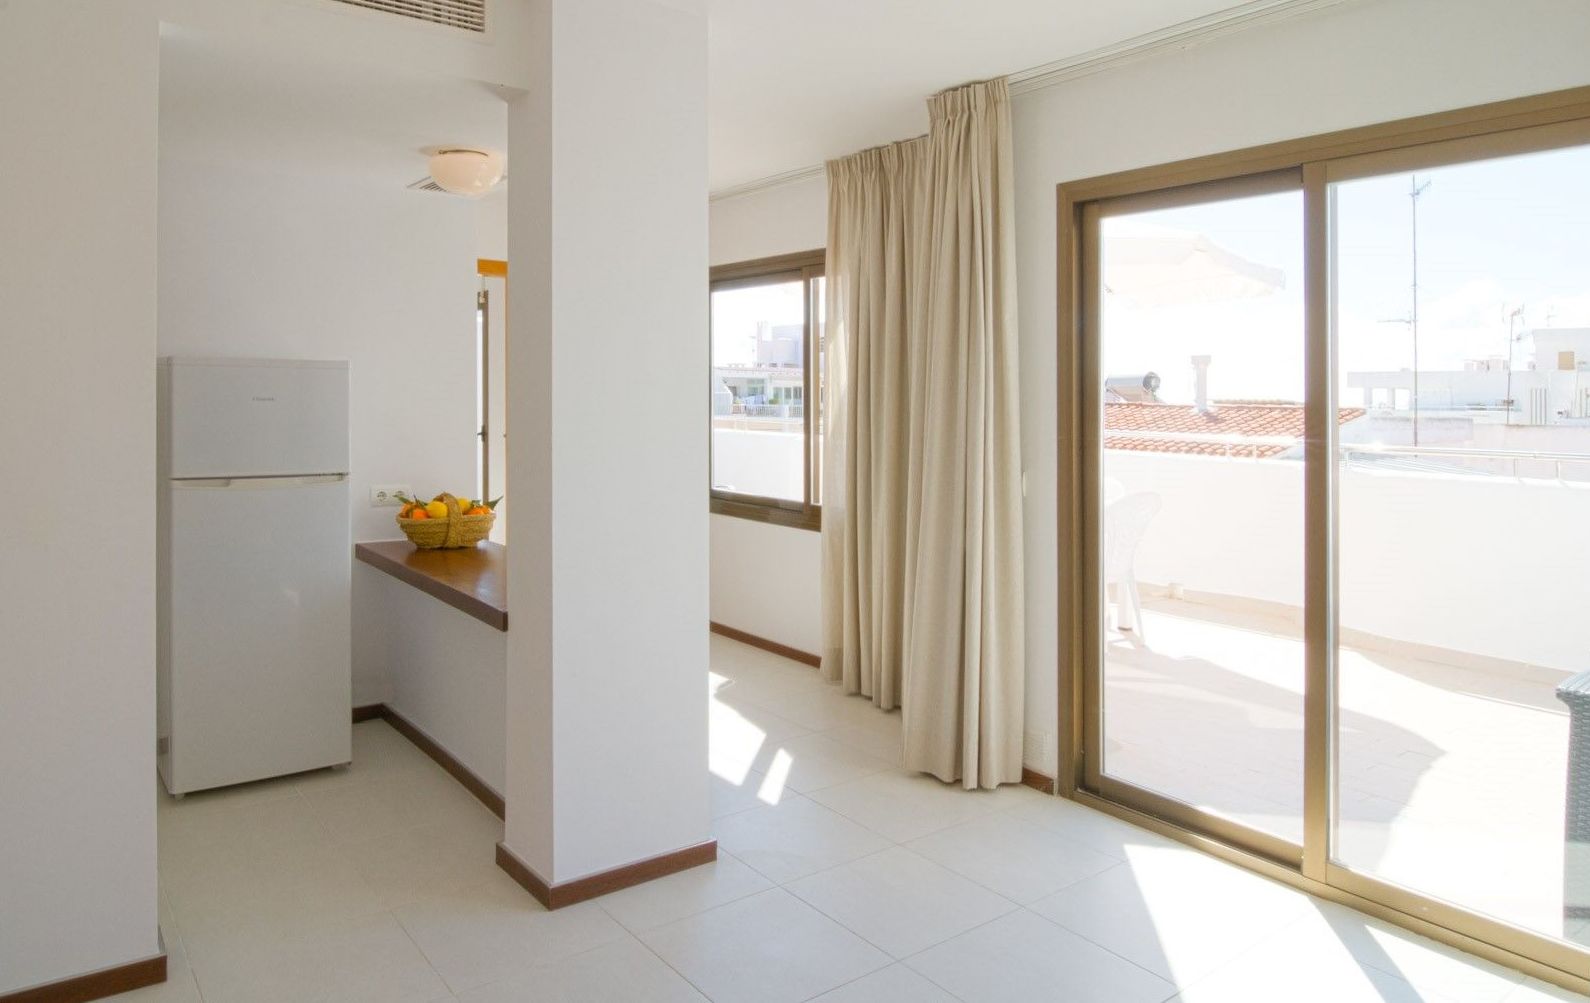 Penthouse 1/4 pers.- vista general